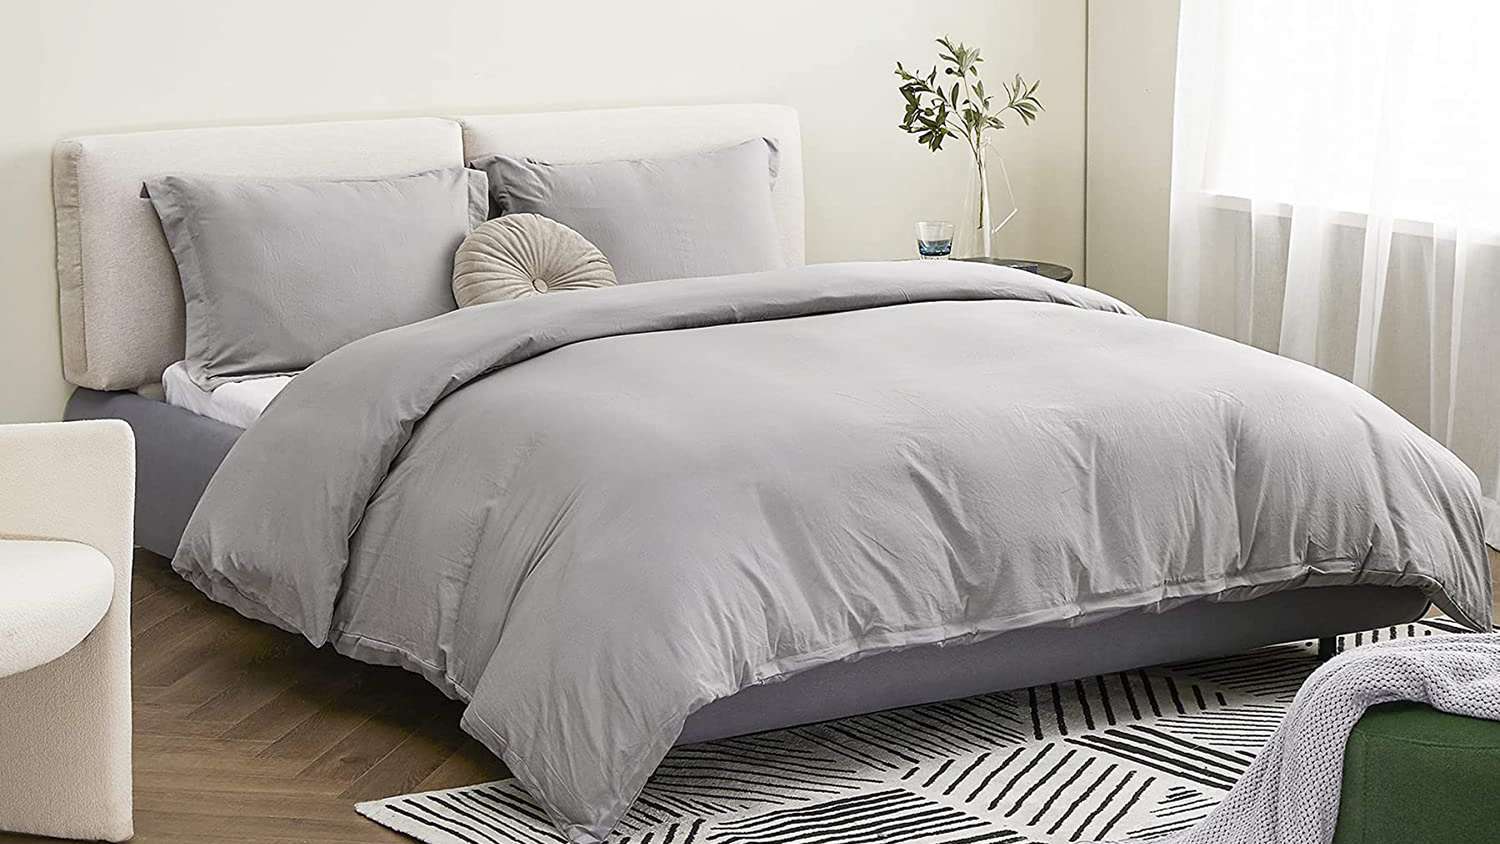 The 16 Best Duvet Covers You Can, Does A King Size Duvet Look Better On Double Bed